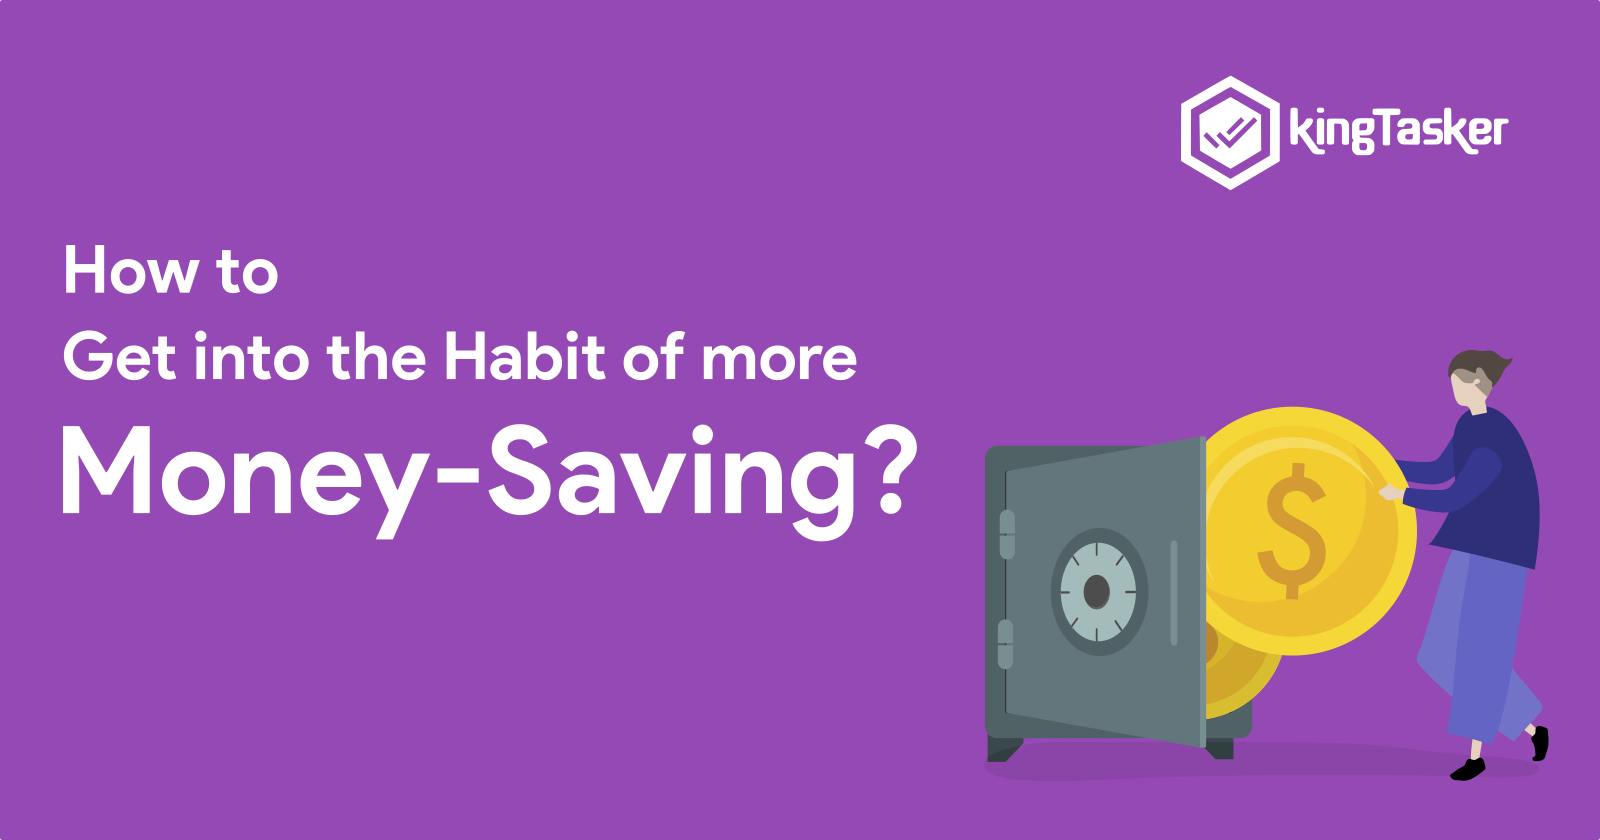 How to get into the habit of more money saving?